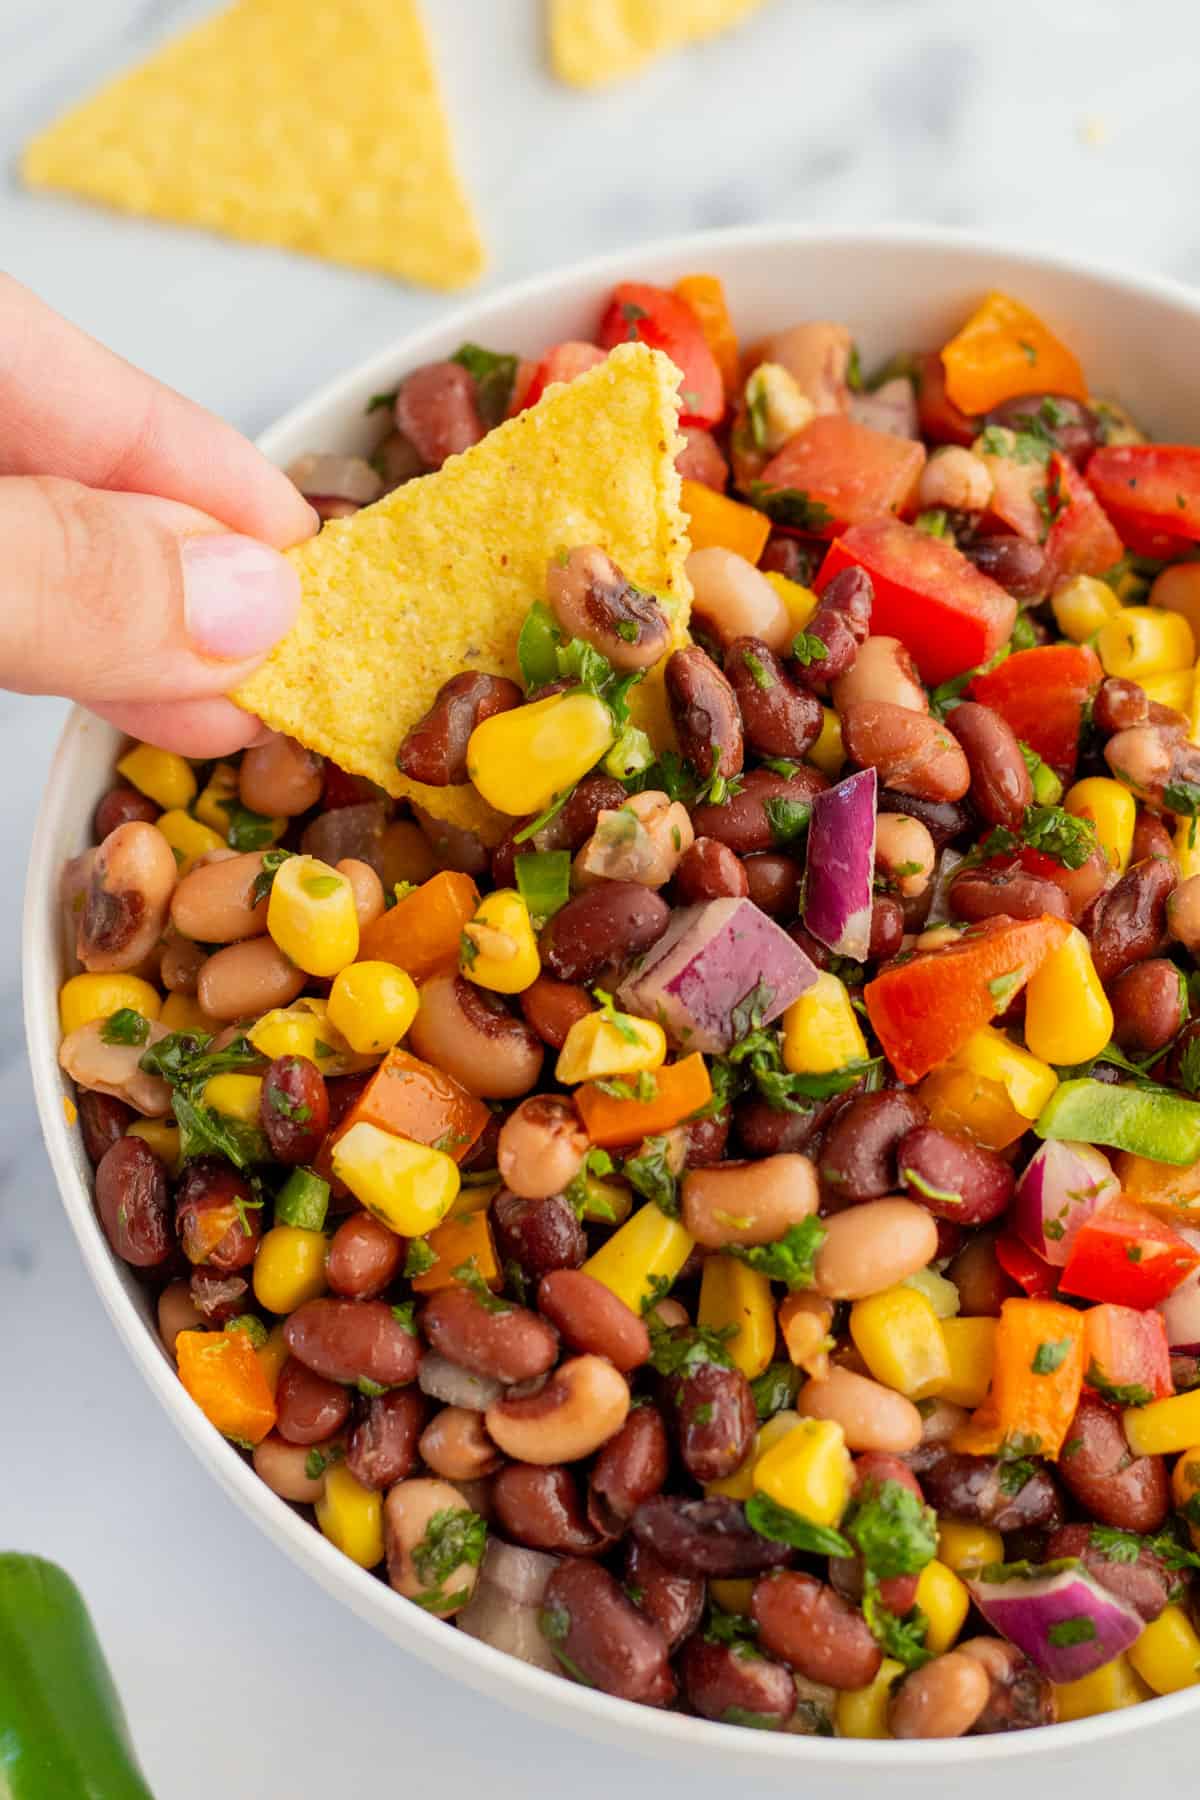 Hand dipping a chip into cowboy caviar.